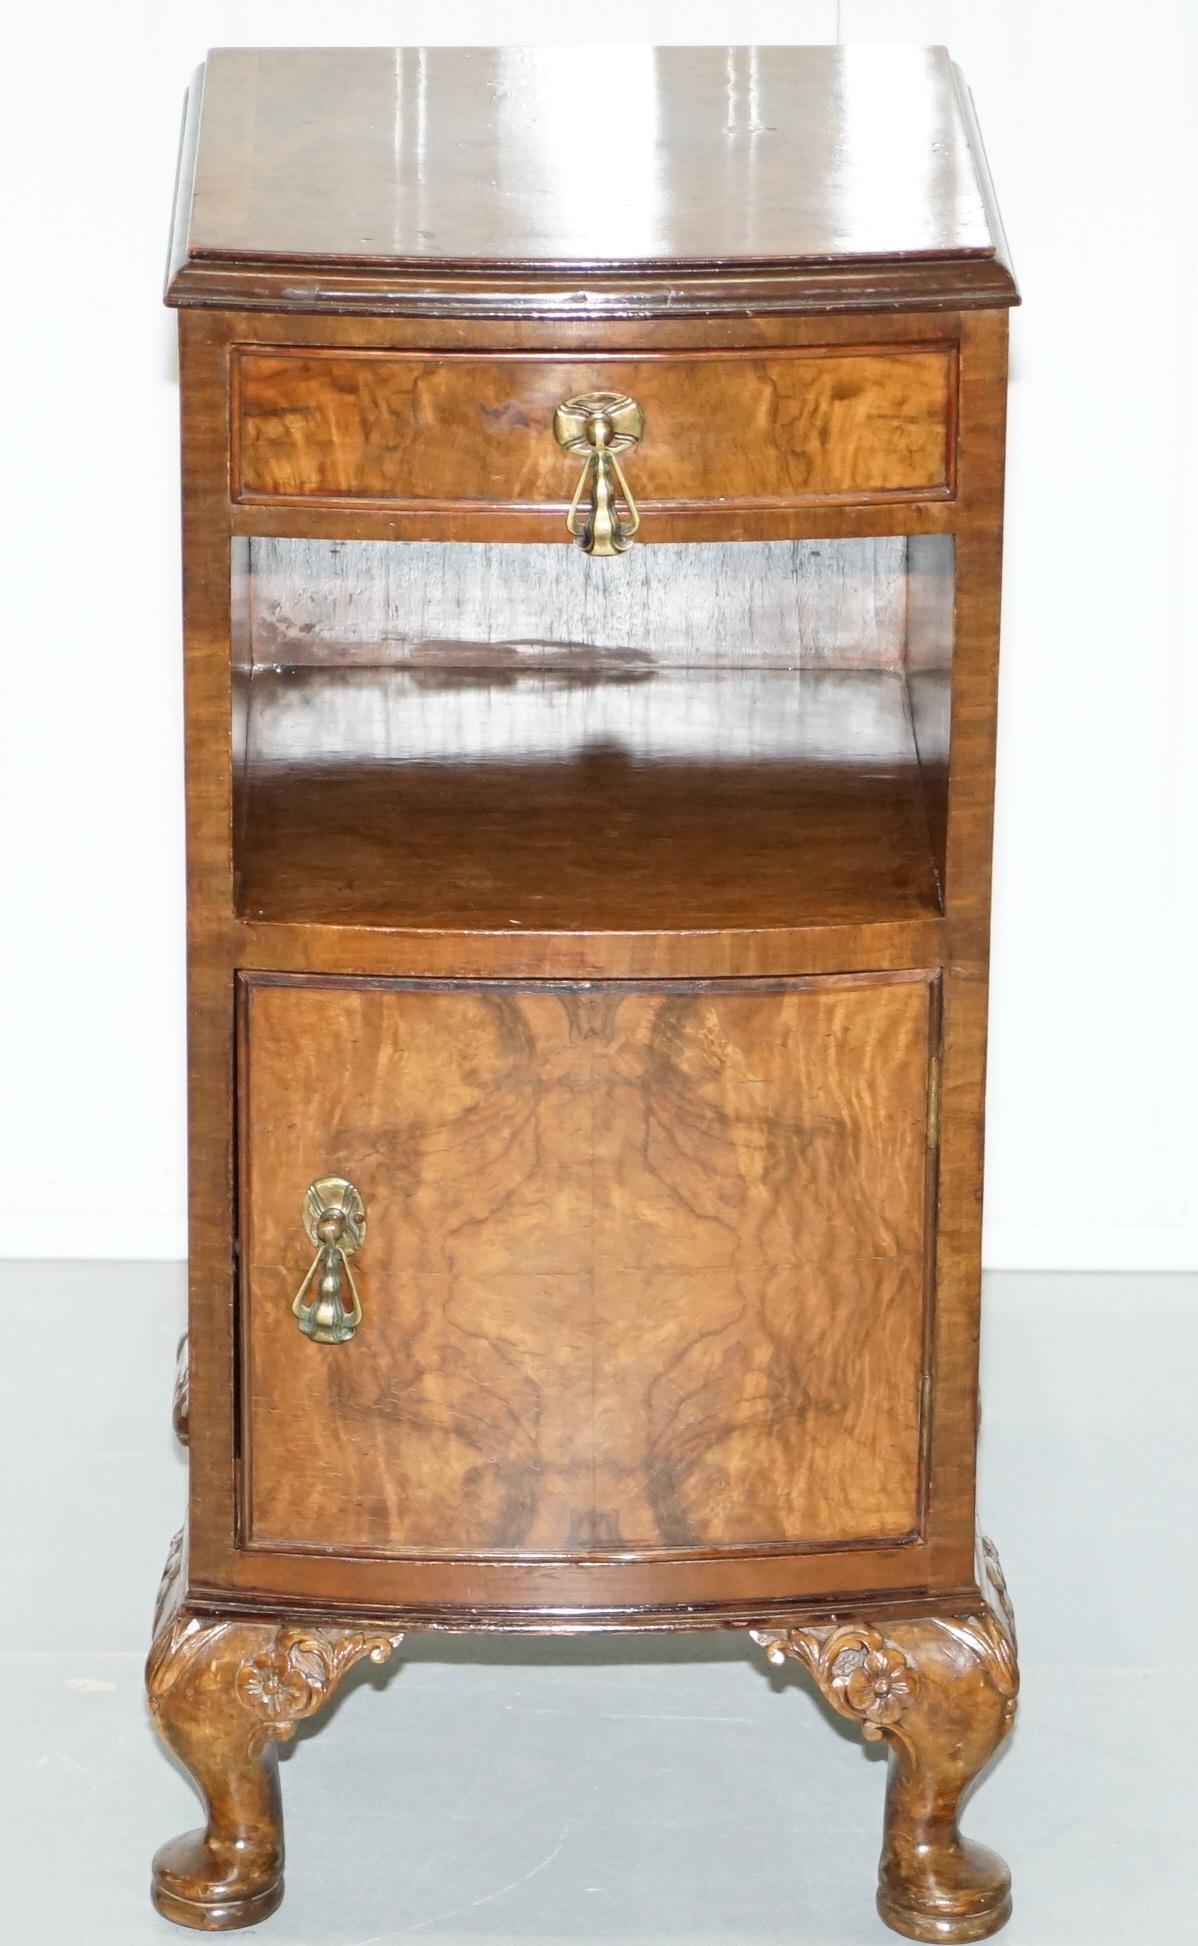 We are delighted to offer for sale this lovely Vintage handmade Victorian Walnut bedside table with Georgian Irish style legs

We have deep cleaned hand condition waxed and hand polished it from top to bottom, the piece is used and as such has